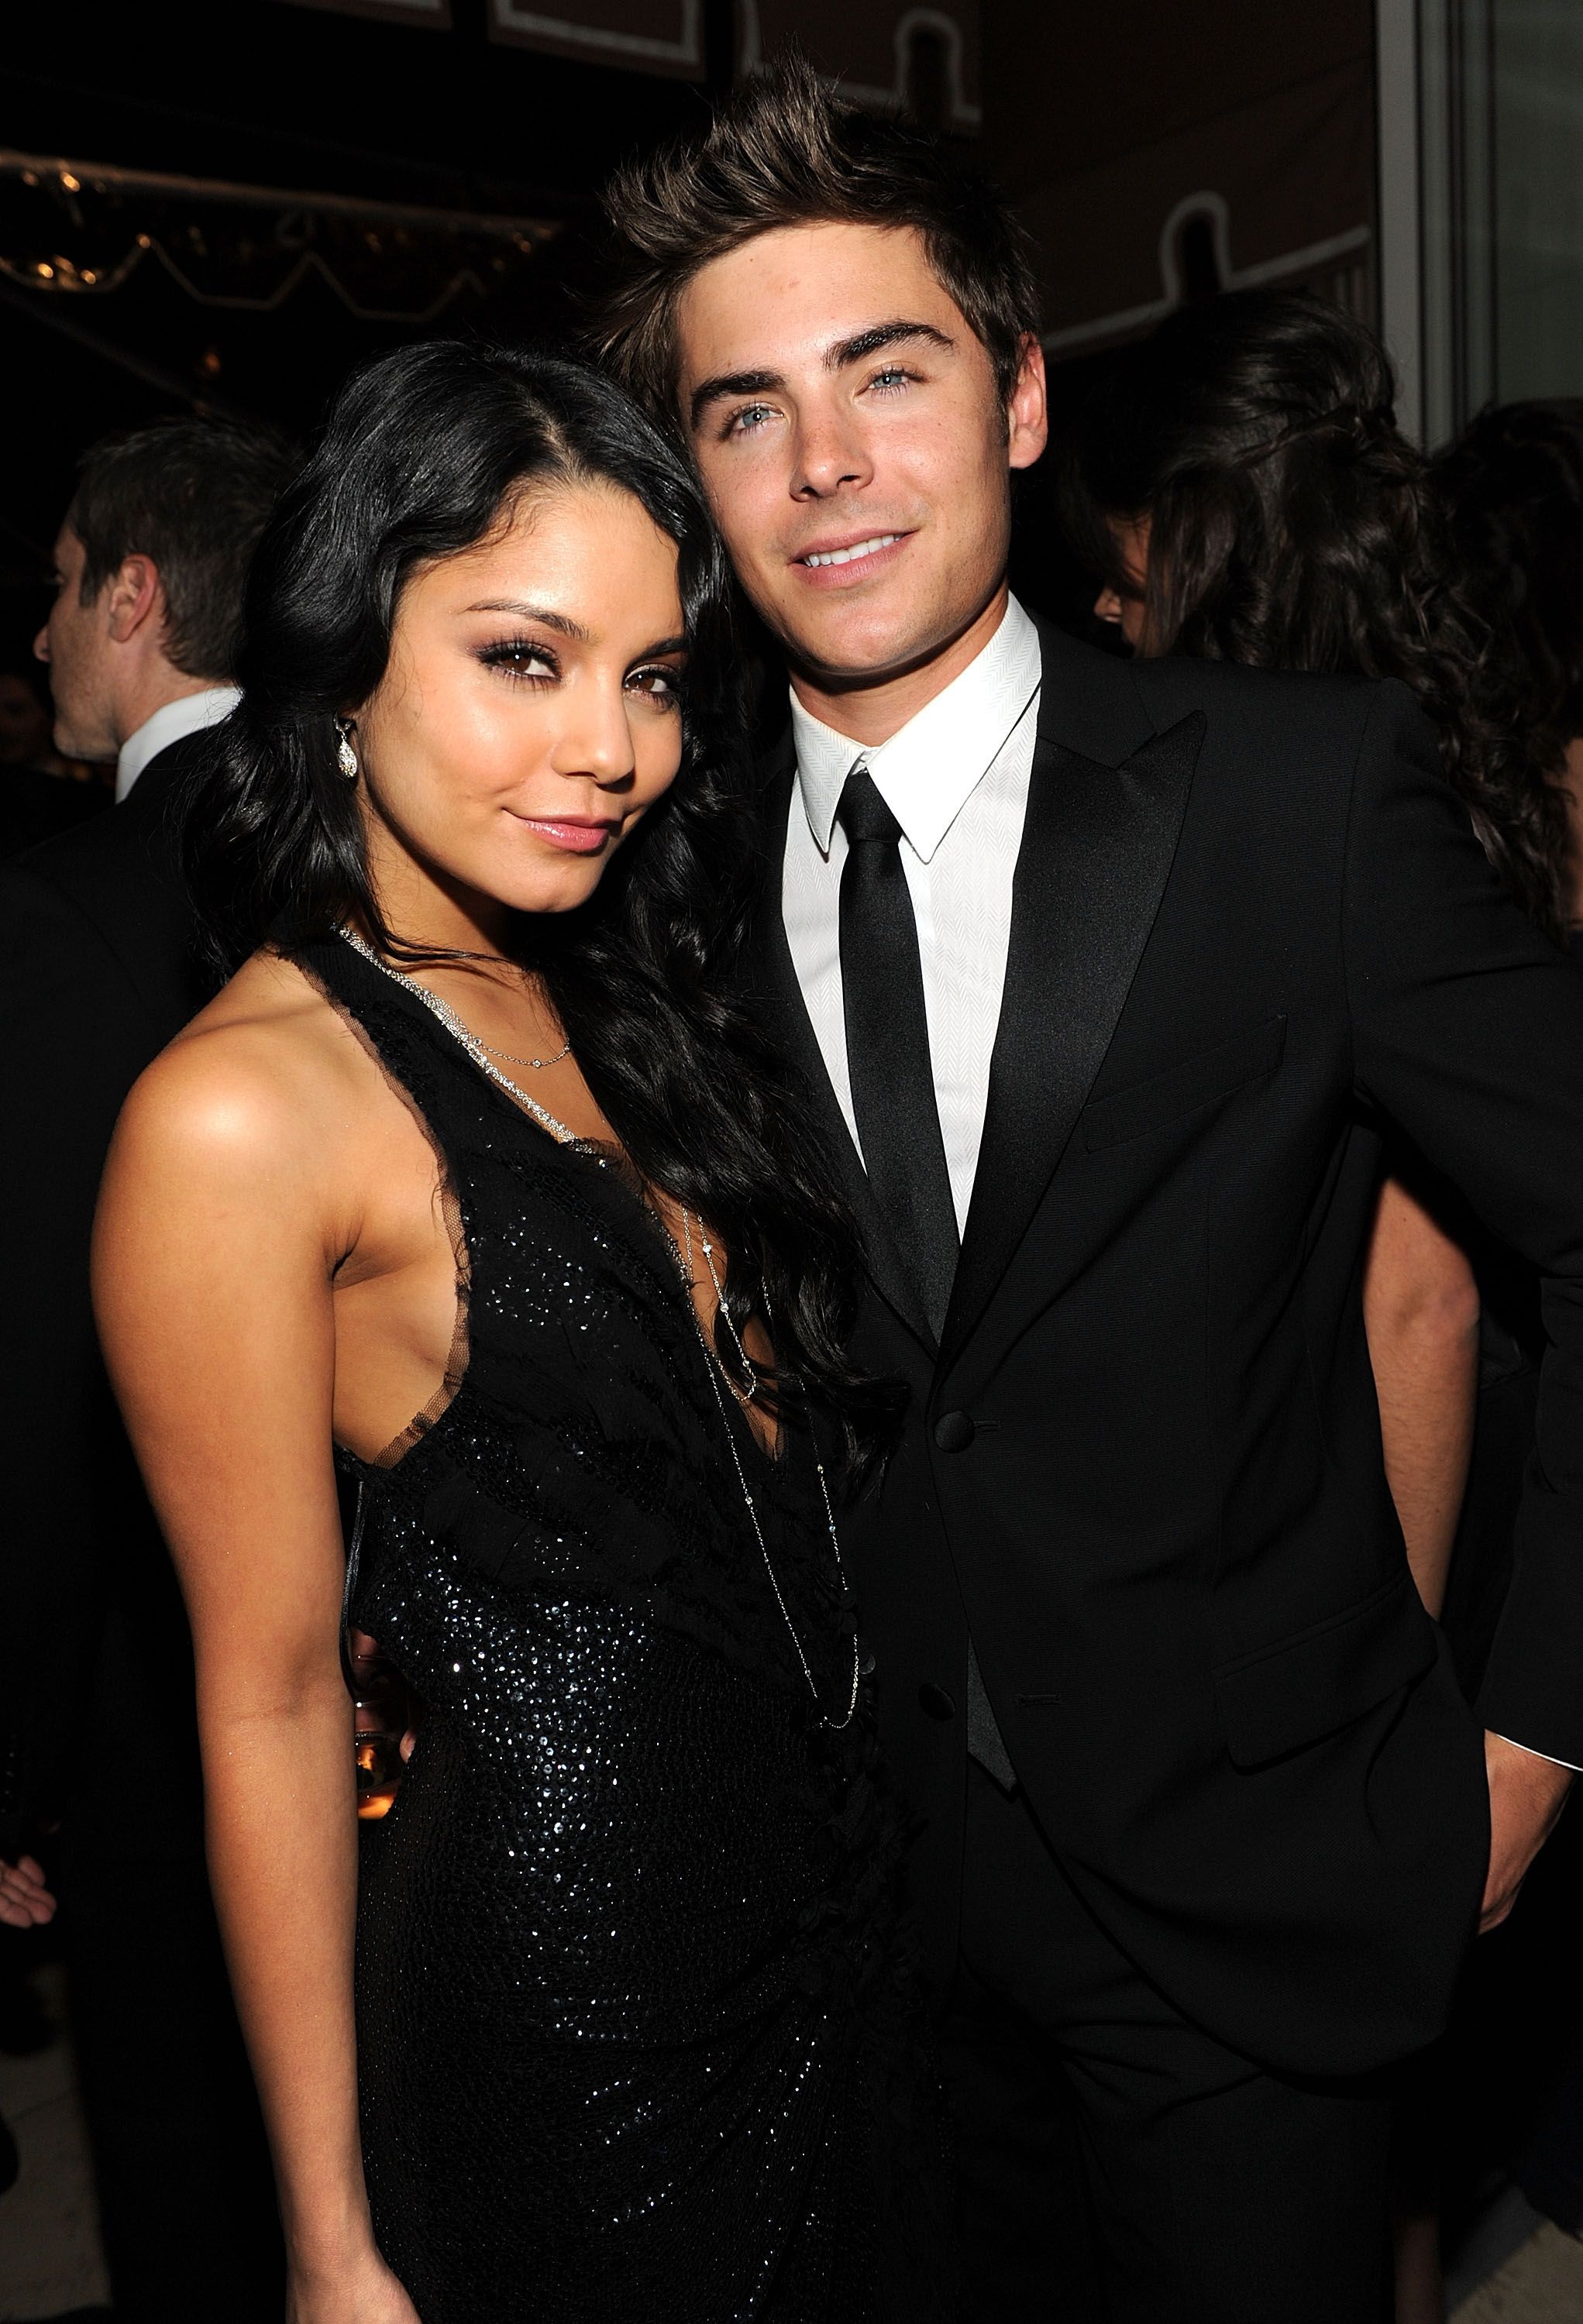 Why did zac and vanessa break up